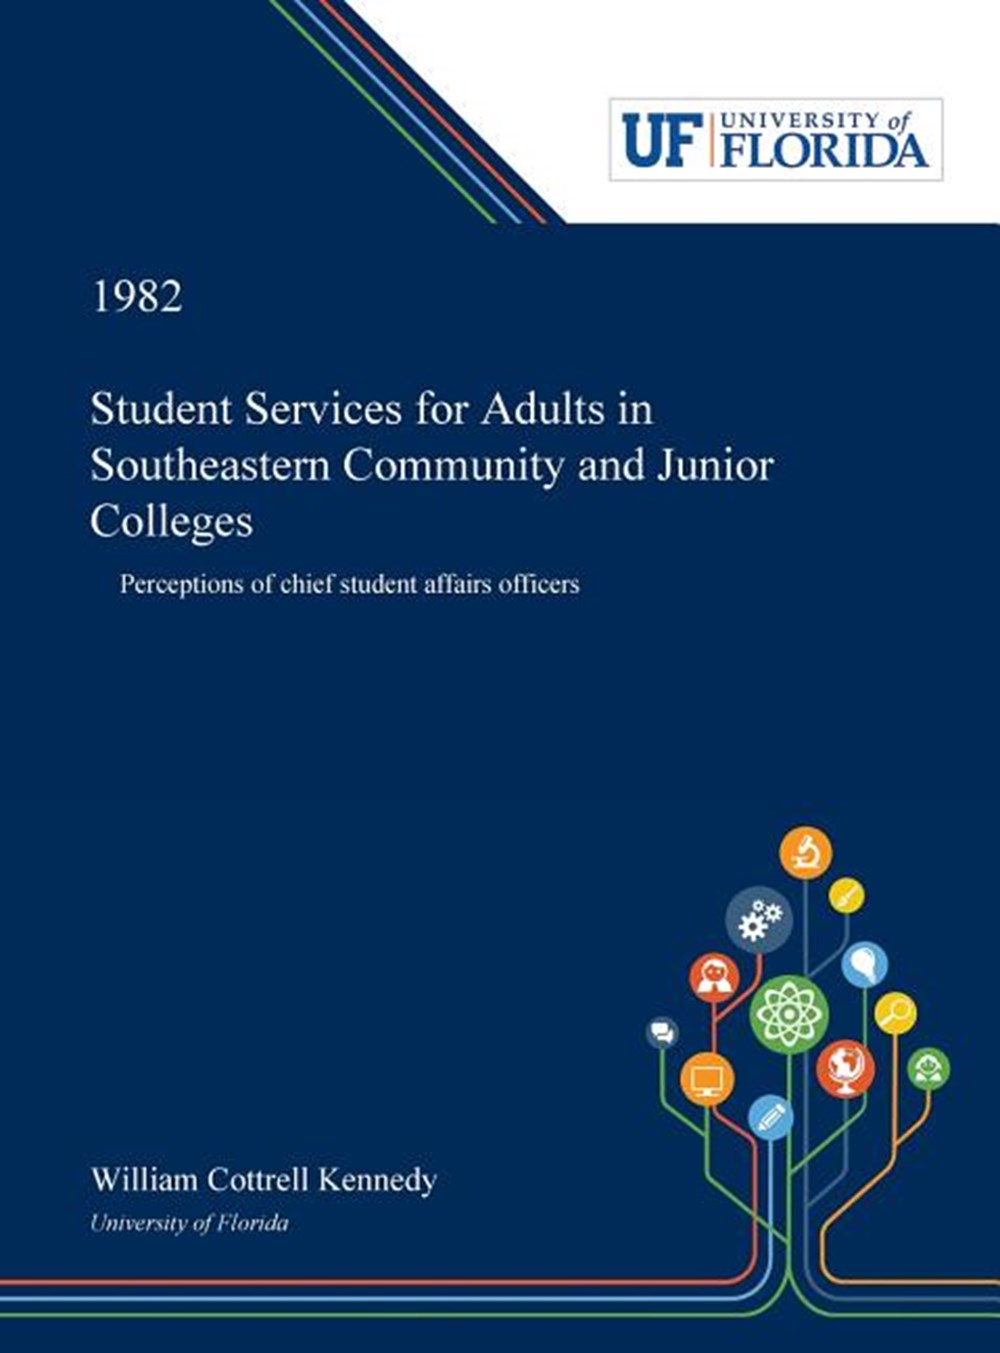 Student Services for Adults in Southeastern Community and Junior Colleges: Perceptions of Chief Stud